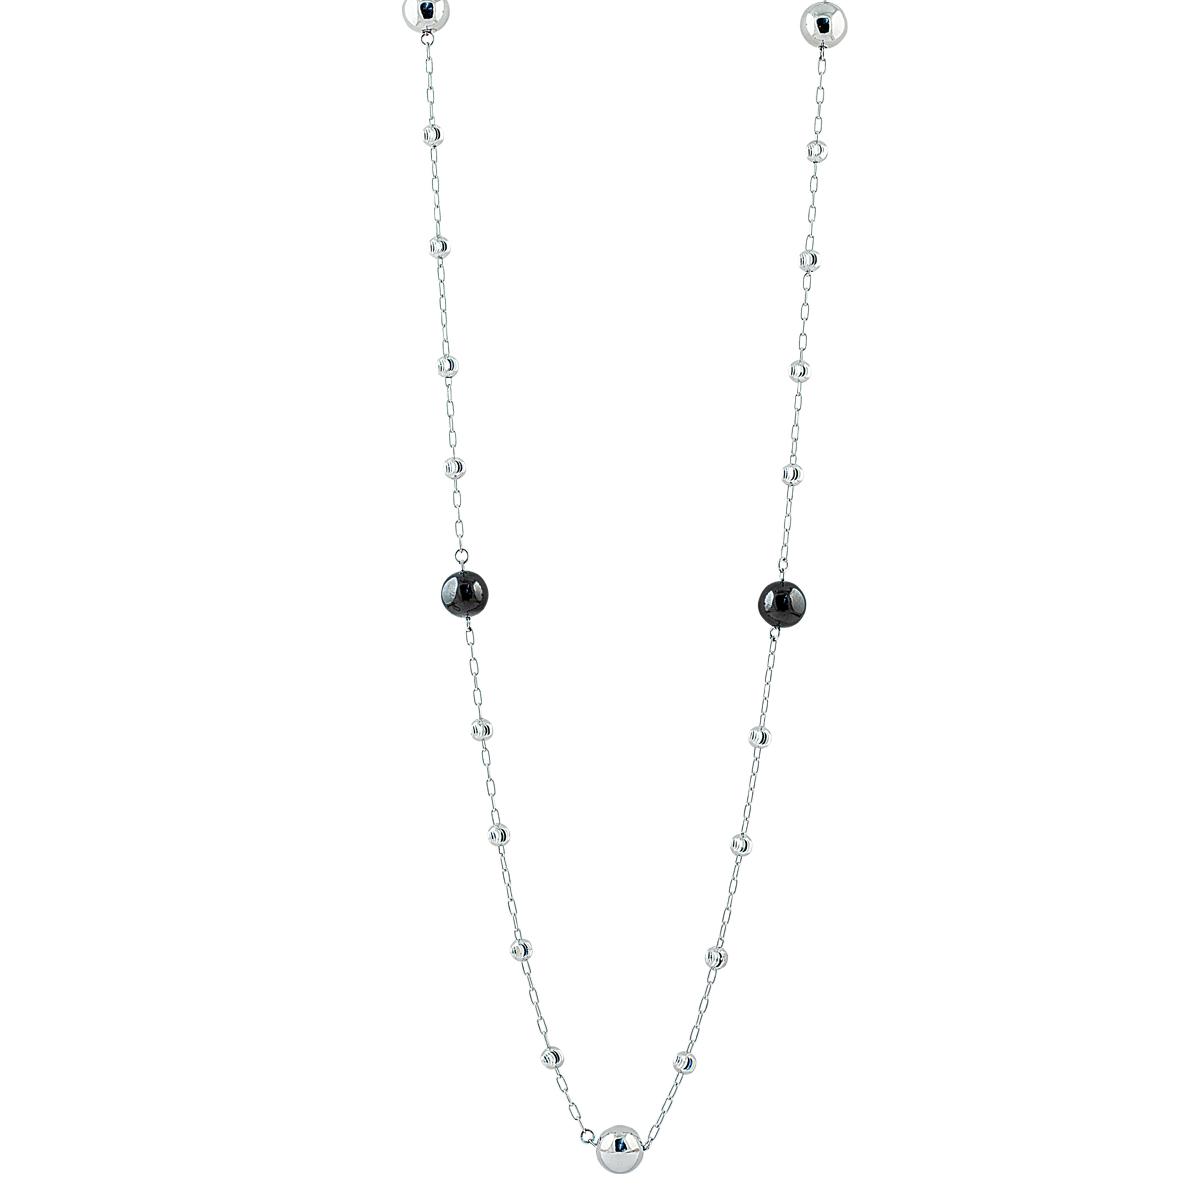 Chanel necklace in rhodium-plated 925 silver and ruthenium - ZCL944-LL